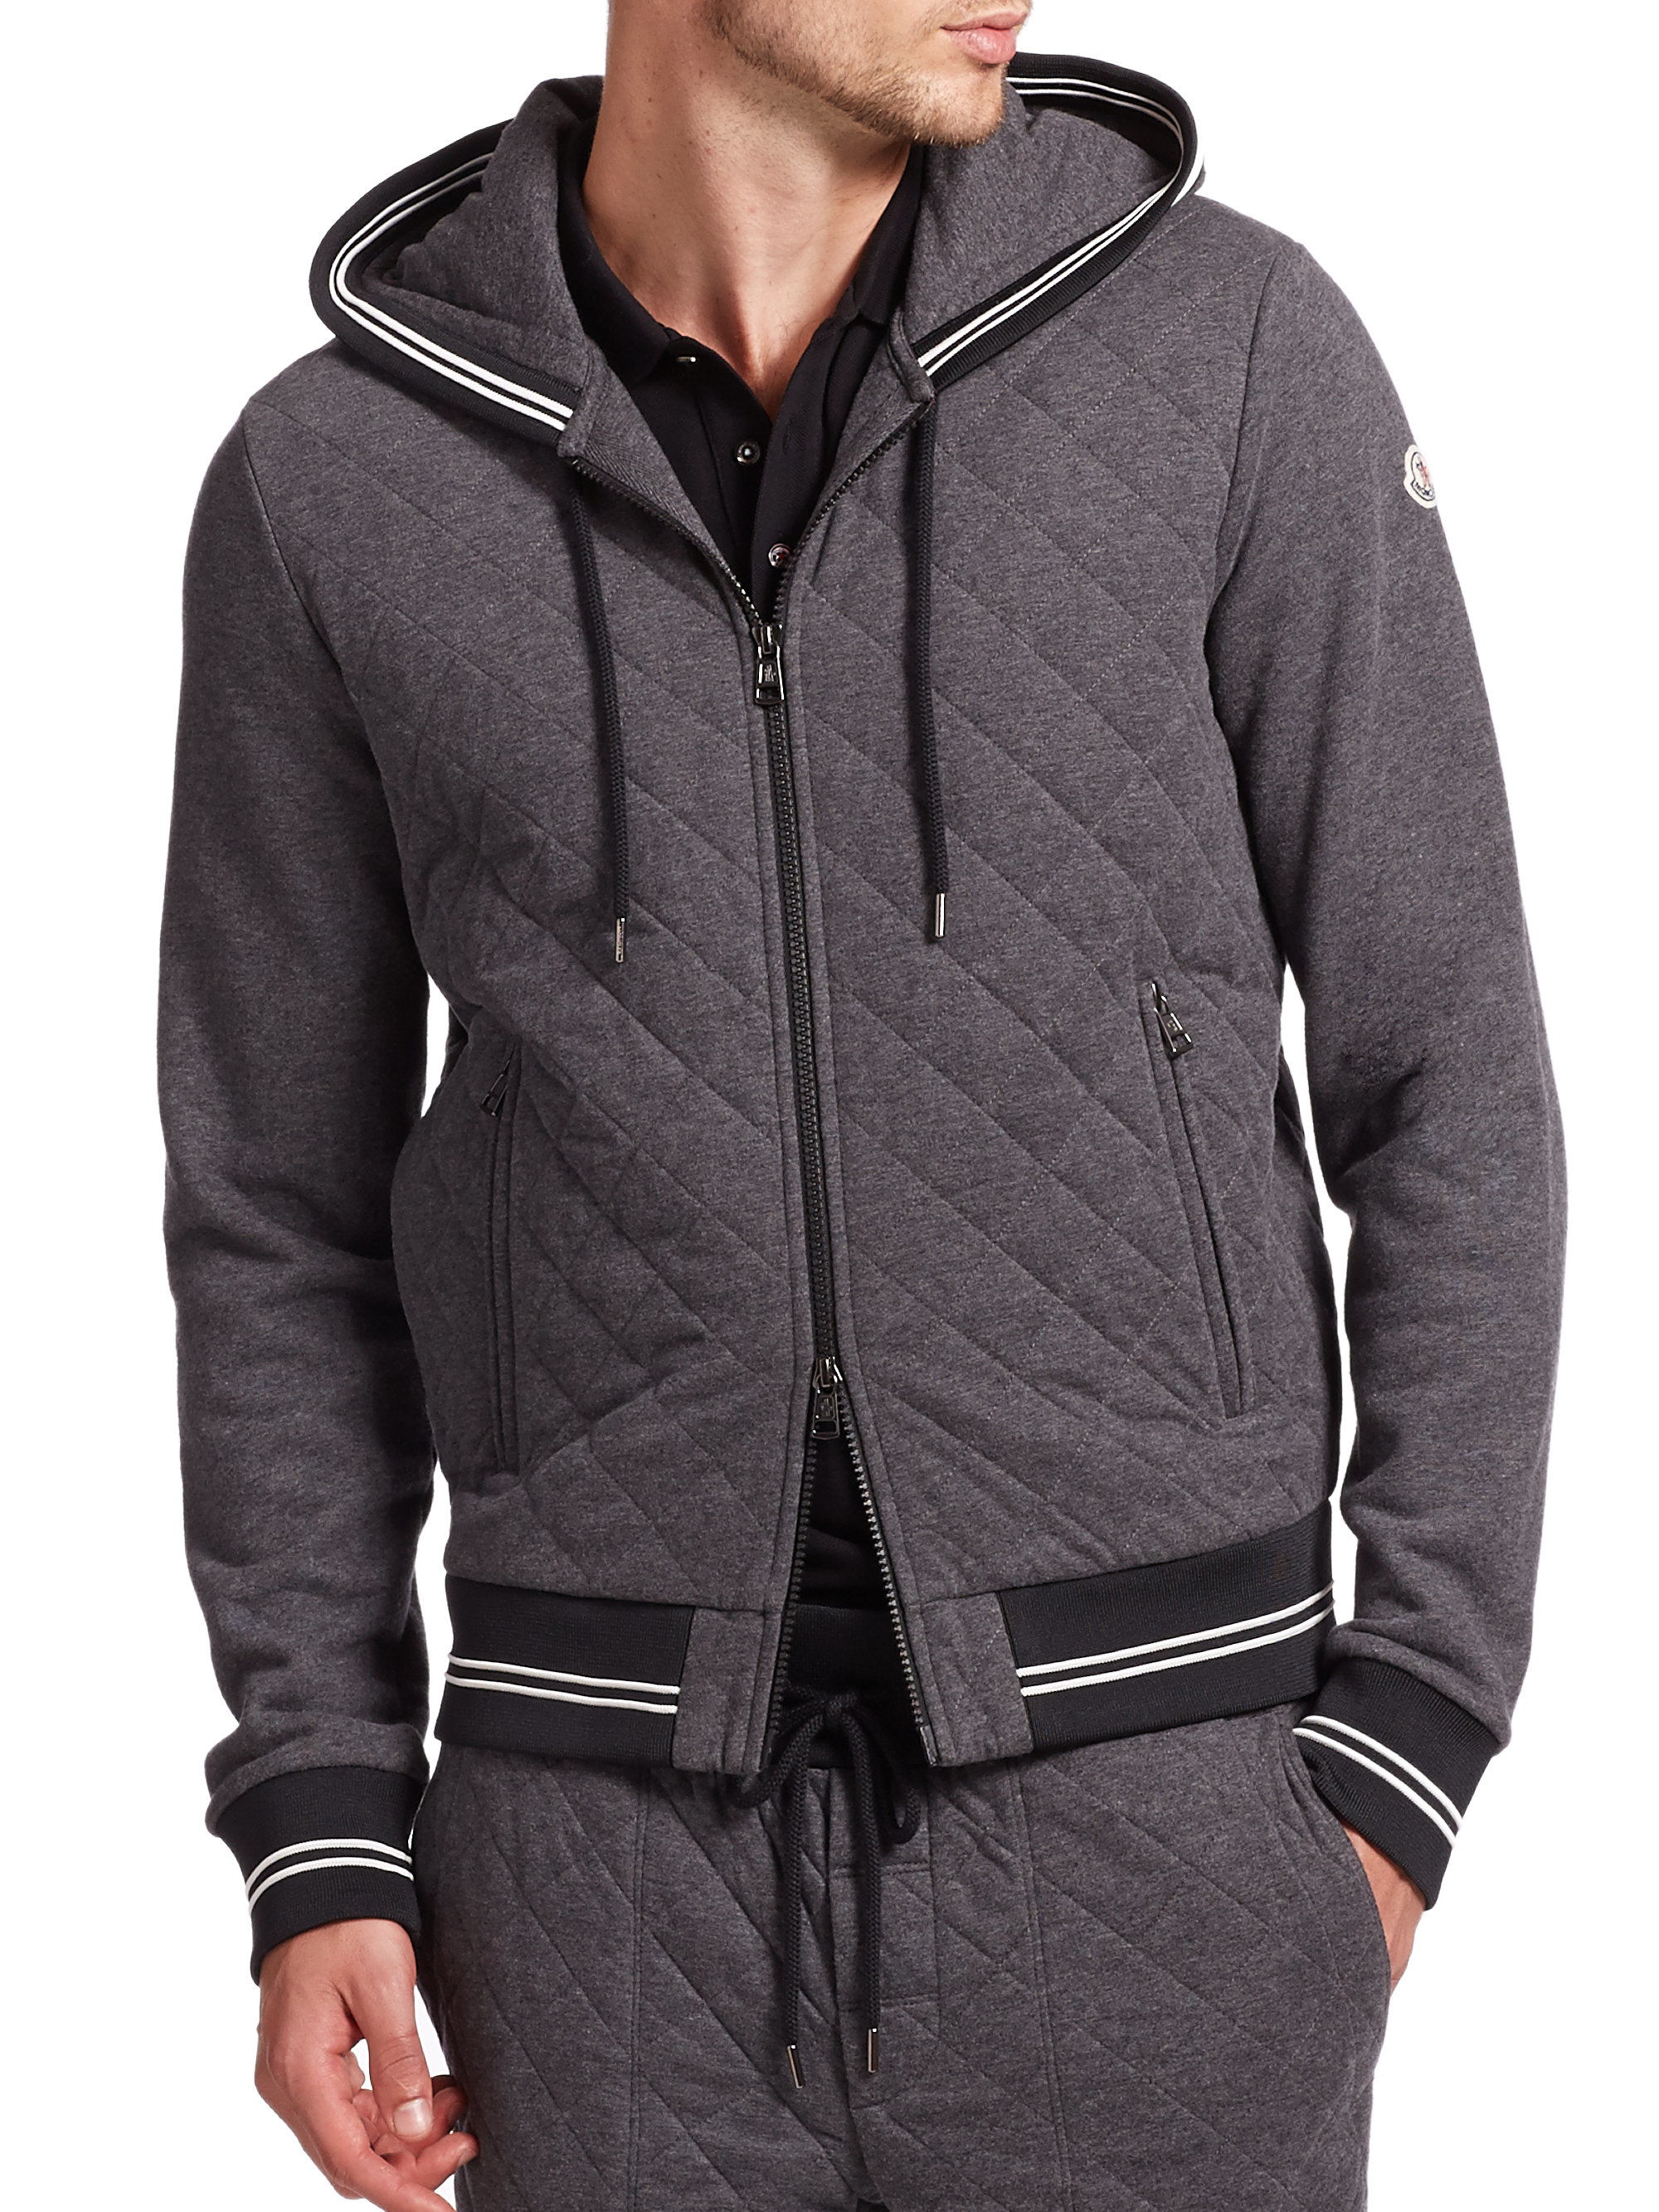 Moncler Maglia Quilted Banded Cotton Hoodie in Gray for Men - Lyst